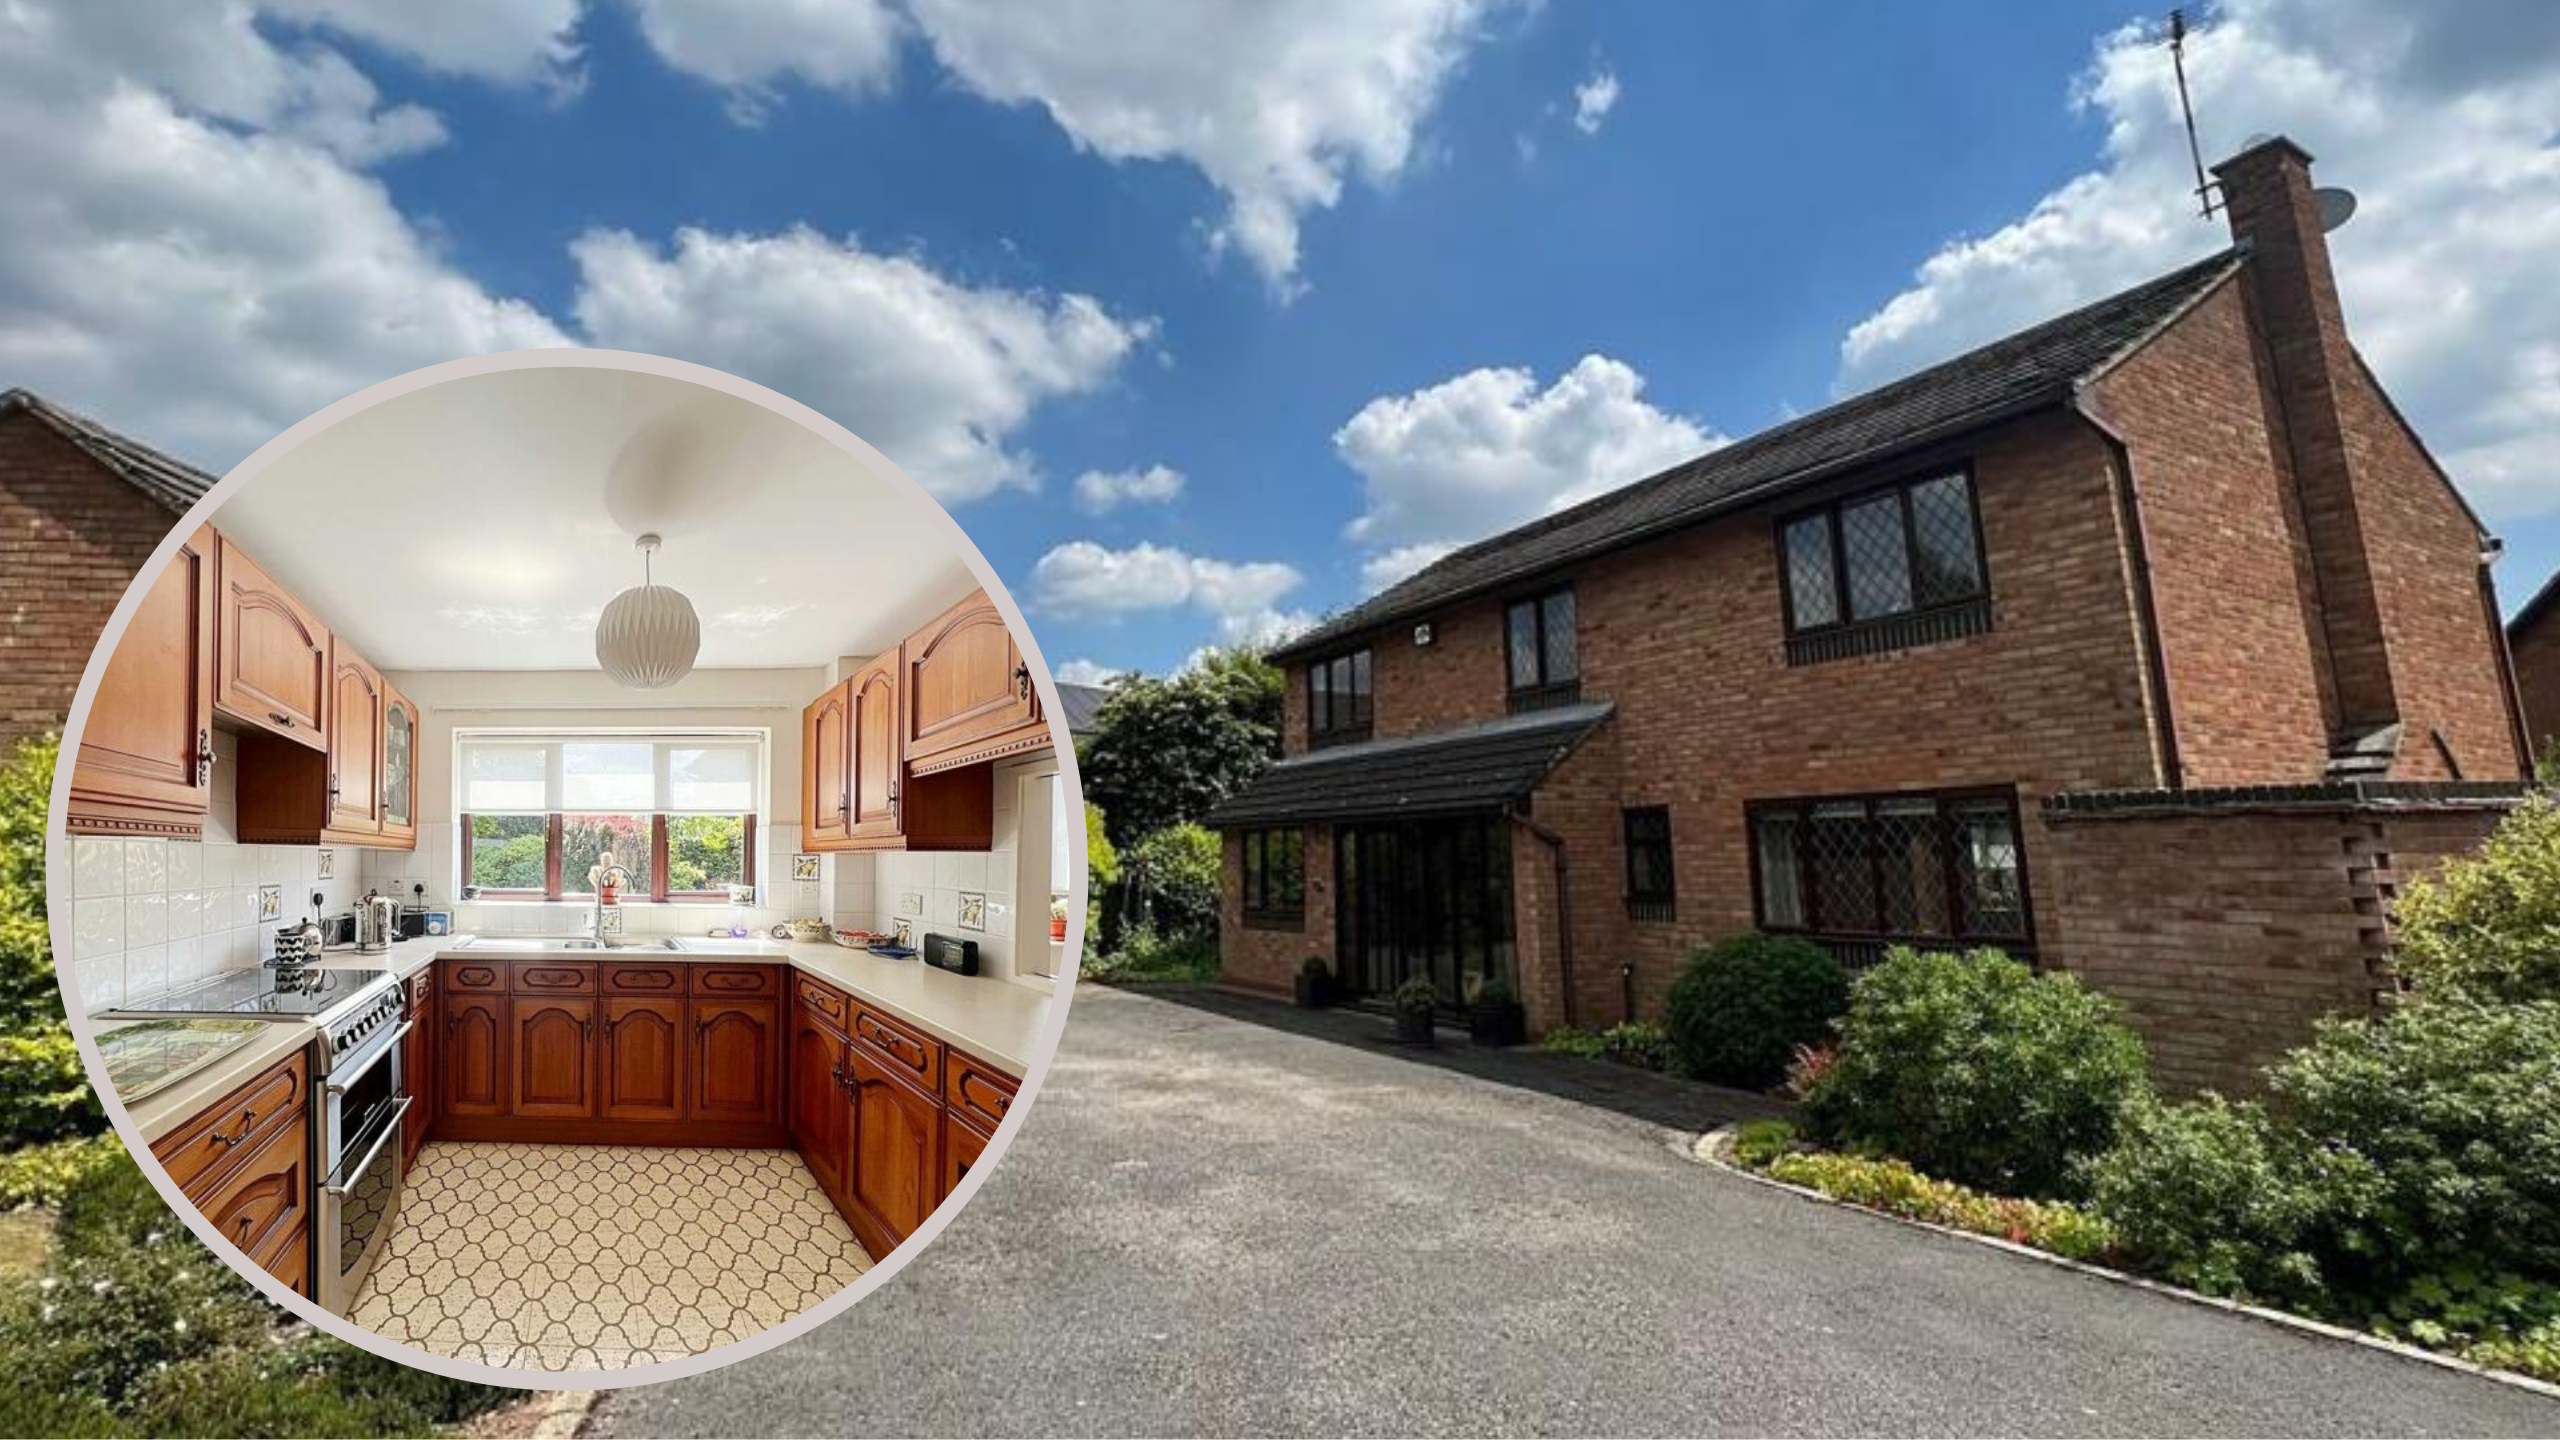 This week we have looked at a five-bedroom detached home on Mountbatten Avenue for £795,000